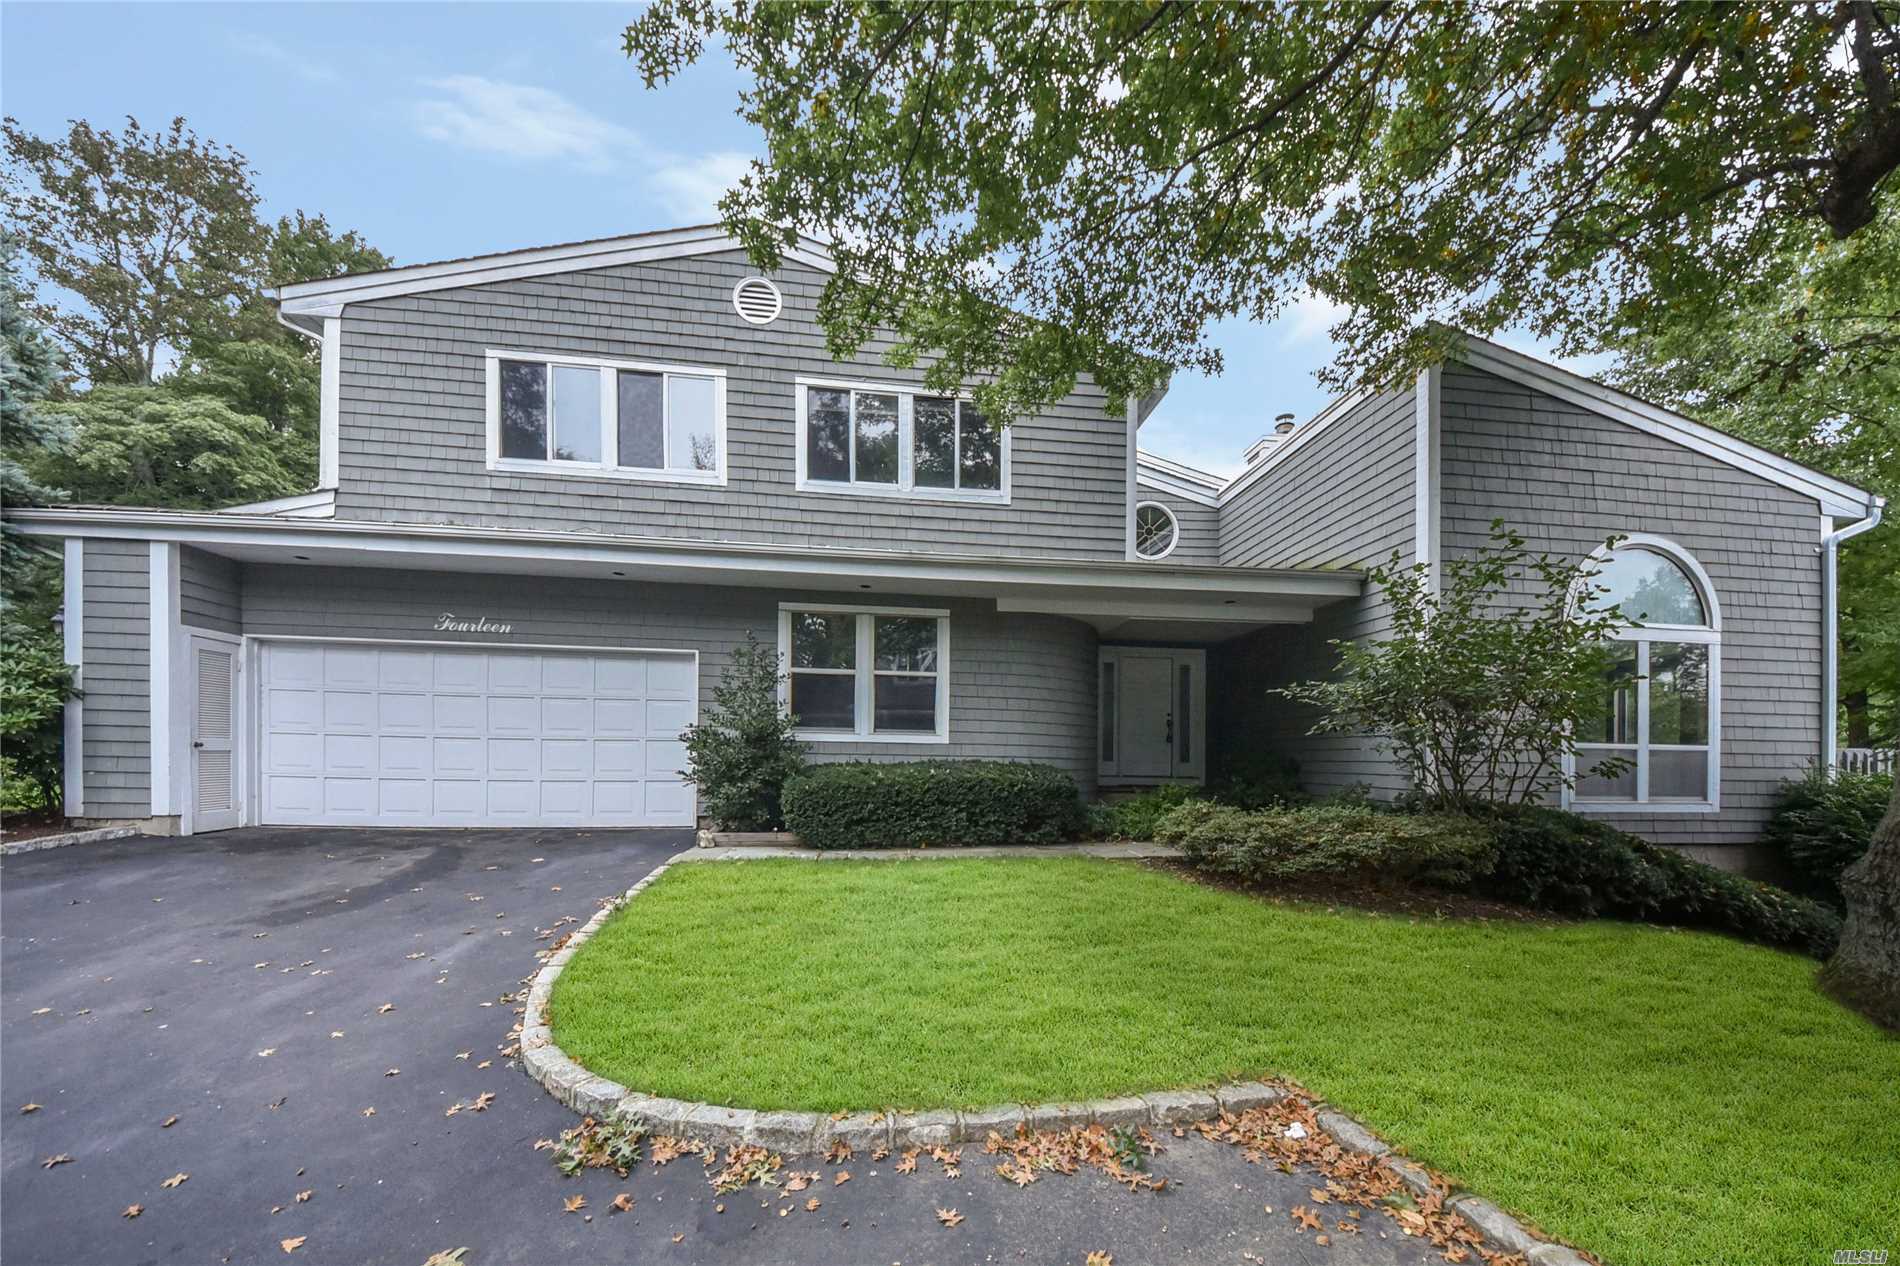 Manhasset. Premier Location In One Of The Most Desired Developments With Sunken Living Room With Built-Ins And Fireplace, Formal Dining Room, And Huge Kitchen. Walk Out Basement Has 2 Bedrooms, Full Bath, Summer Kitchen And View Of The Pond.